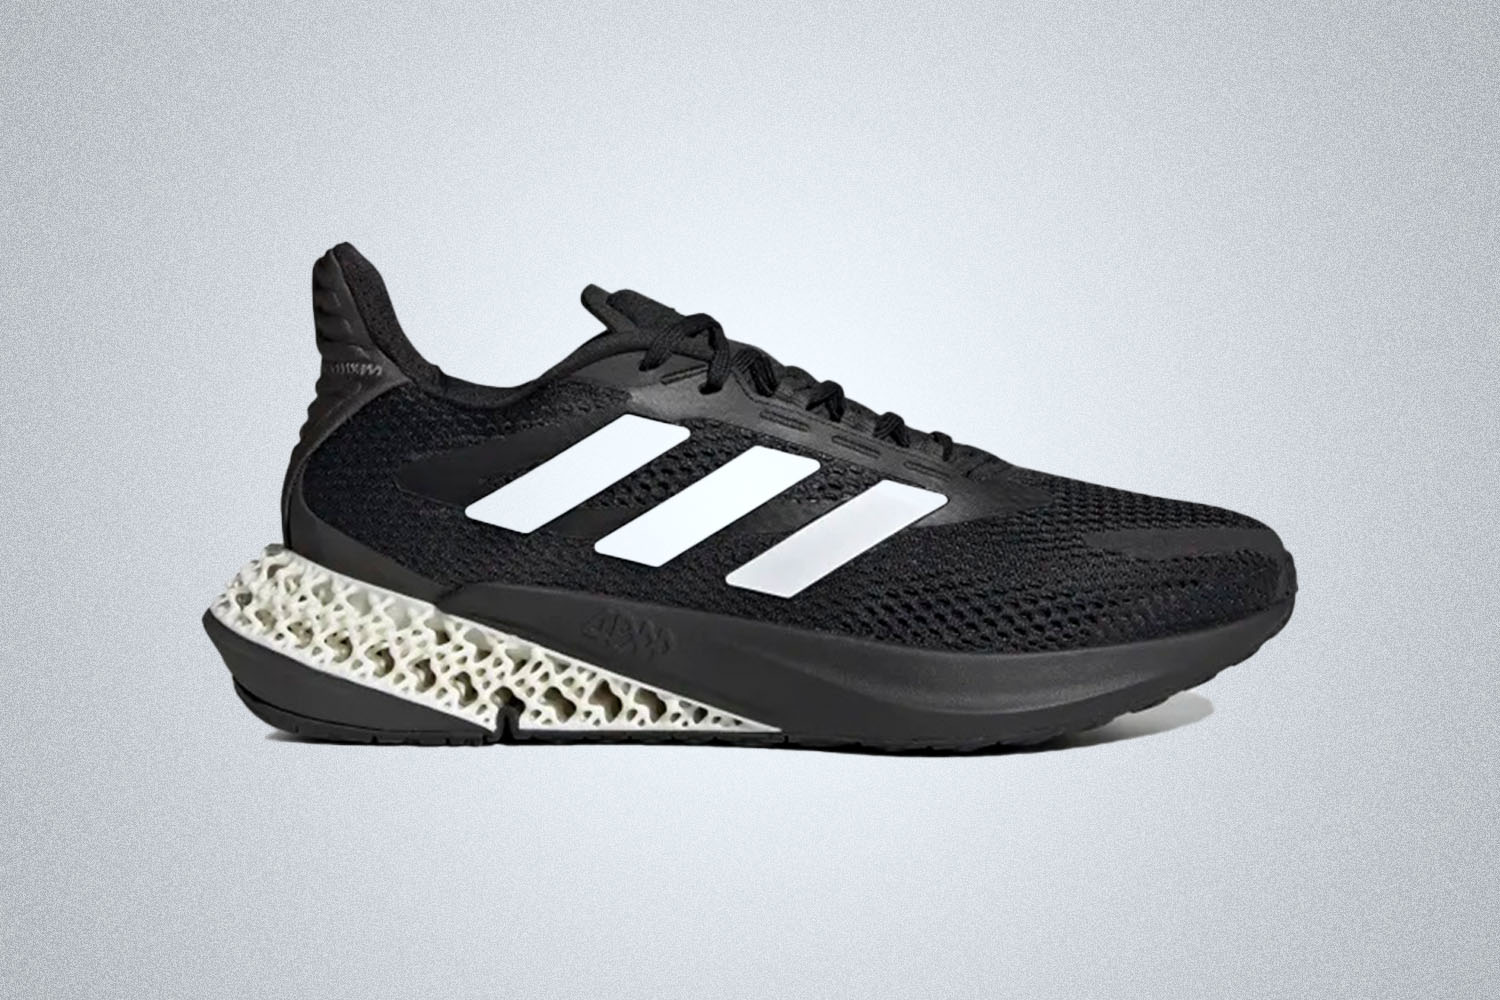 a pair of black and white-accented 4D-printed sneakers from Adidas on a grey background